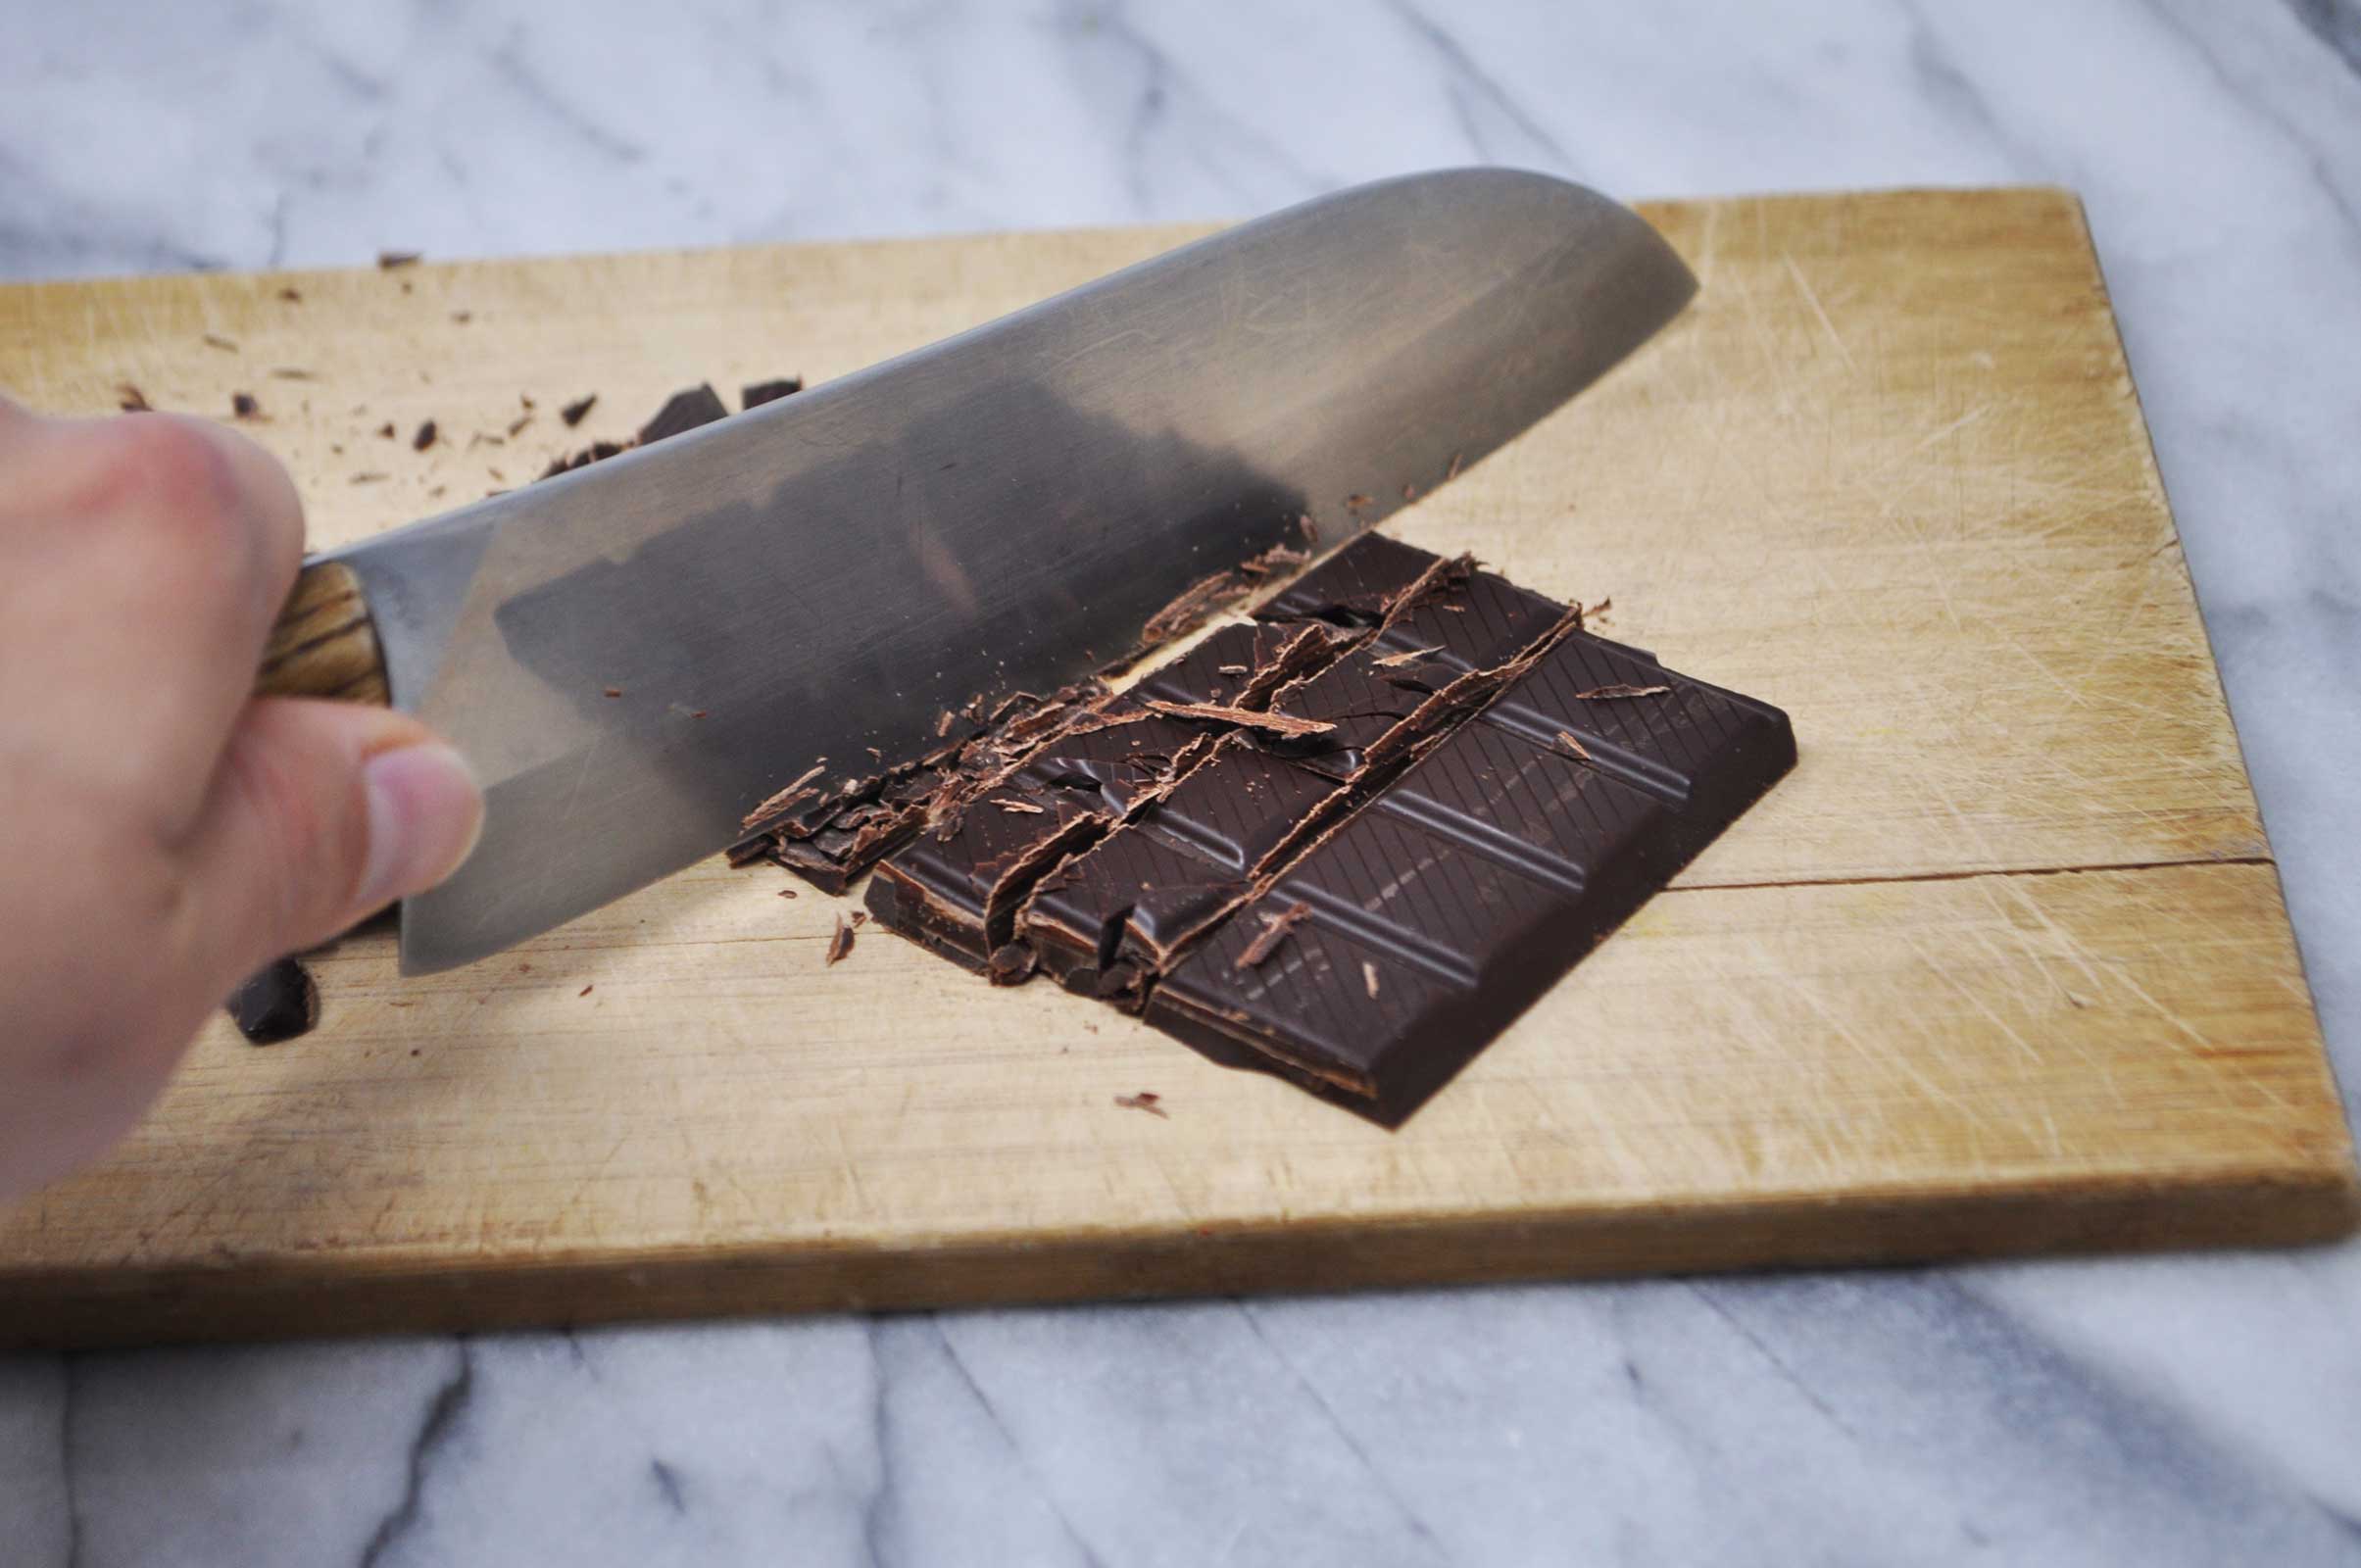 Image of a hand holding a chef's knife, cutting a bar of dark chocolate into small pieces on a cutting board